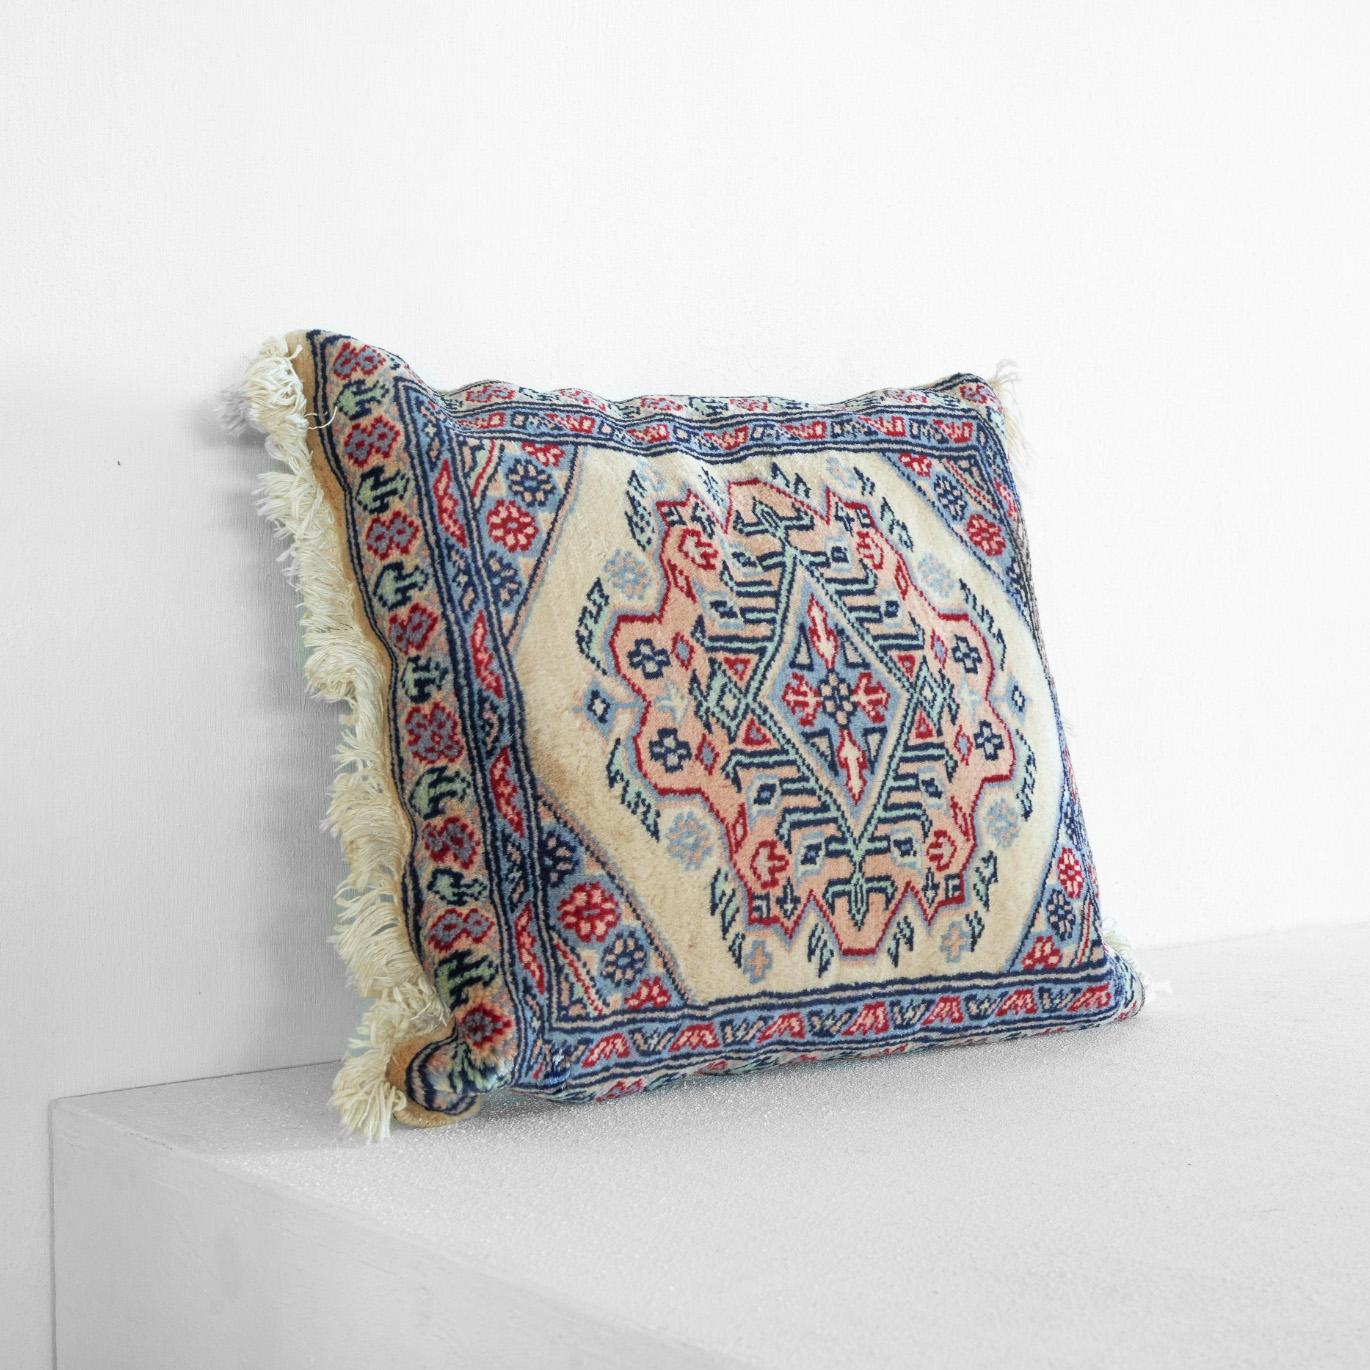 Hand woven mid-century pillow. First half of the 20th century.

Nice and colorful, this antique hand woven pillow is a very nice addition to your interior. The colors and the pattern are stylish and the softness of the pillow will give you a great